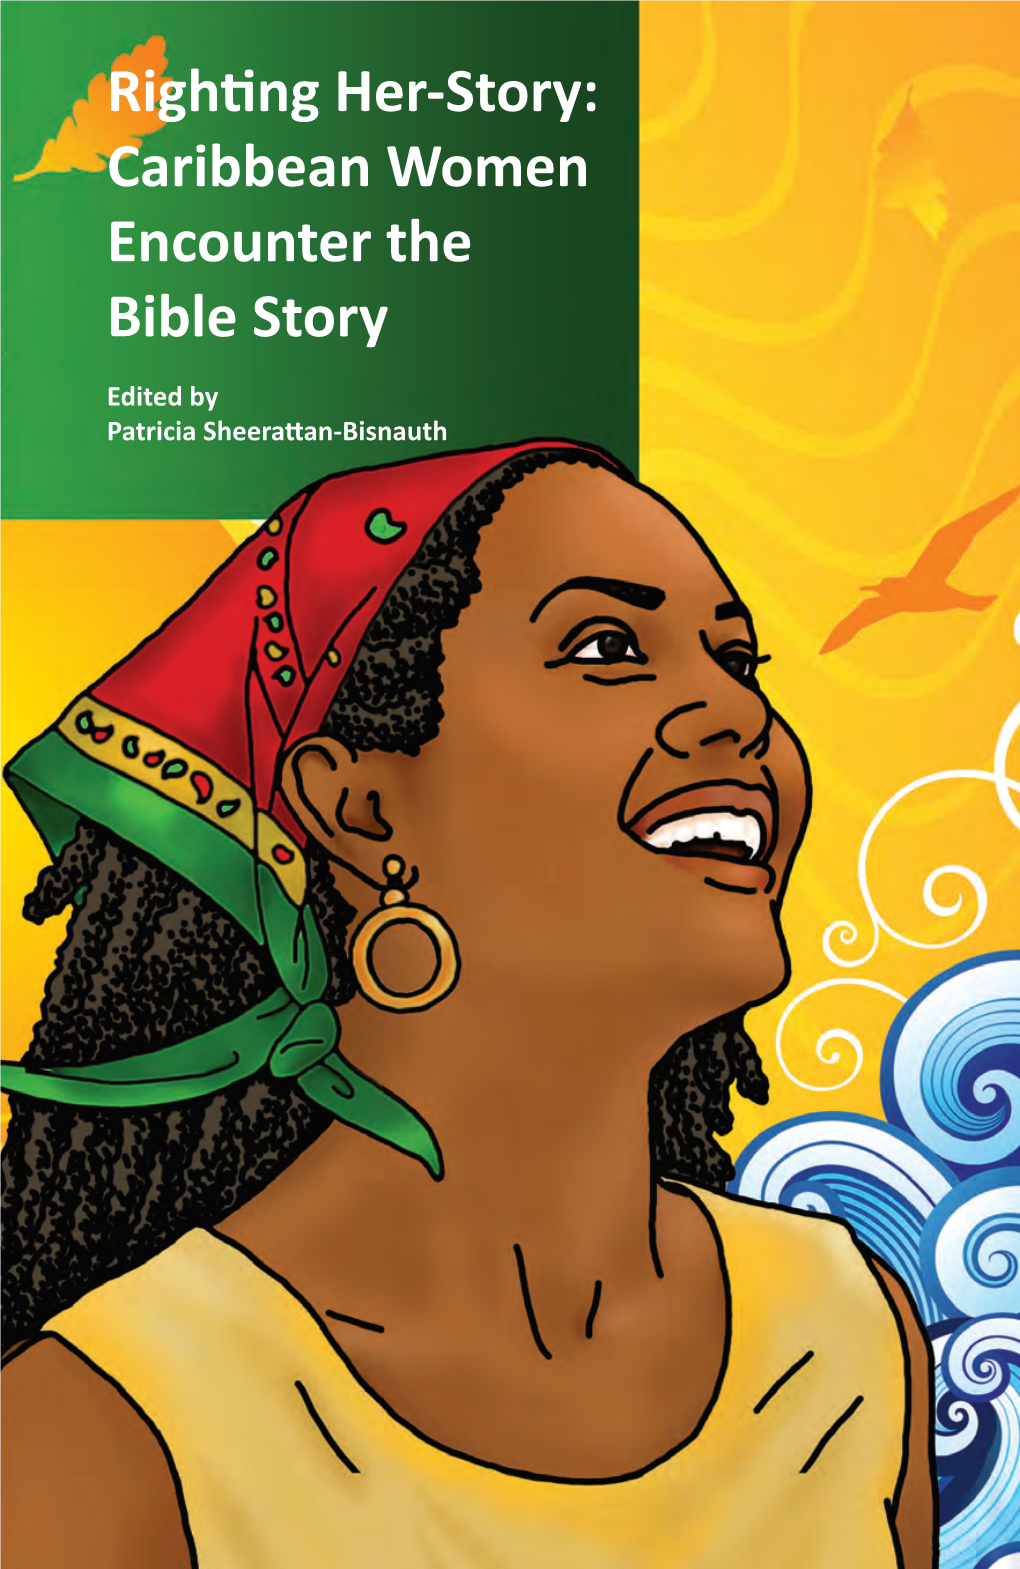 Righting Her-Story: Caribbean Women Encounter the Bible Story